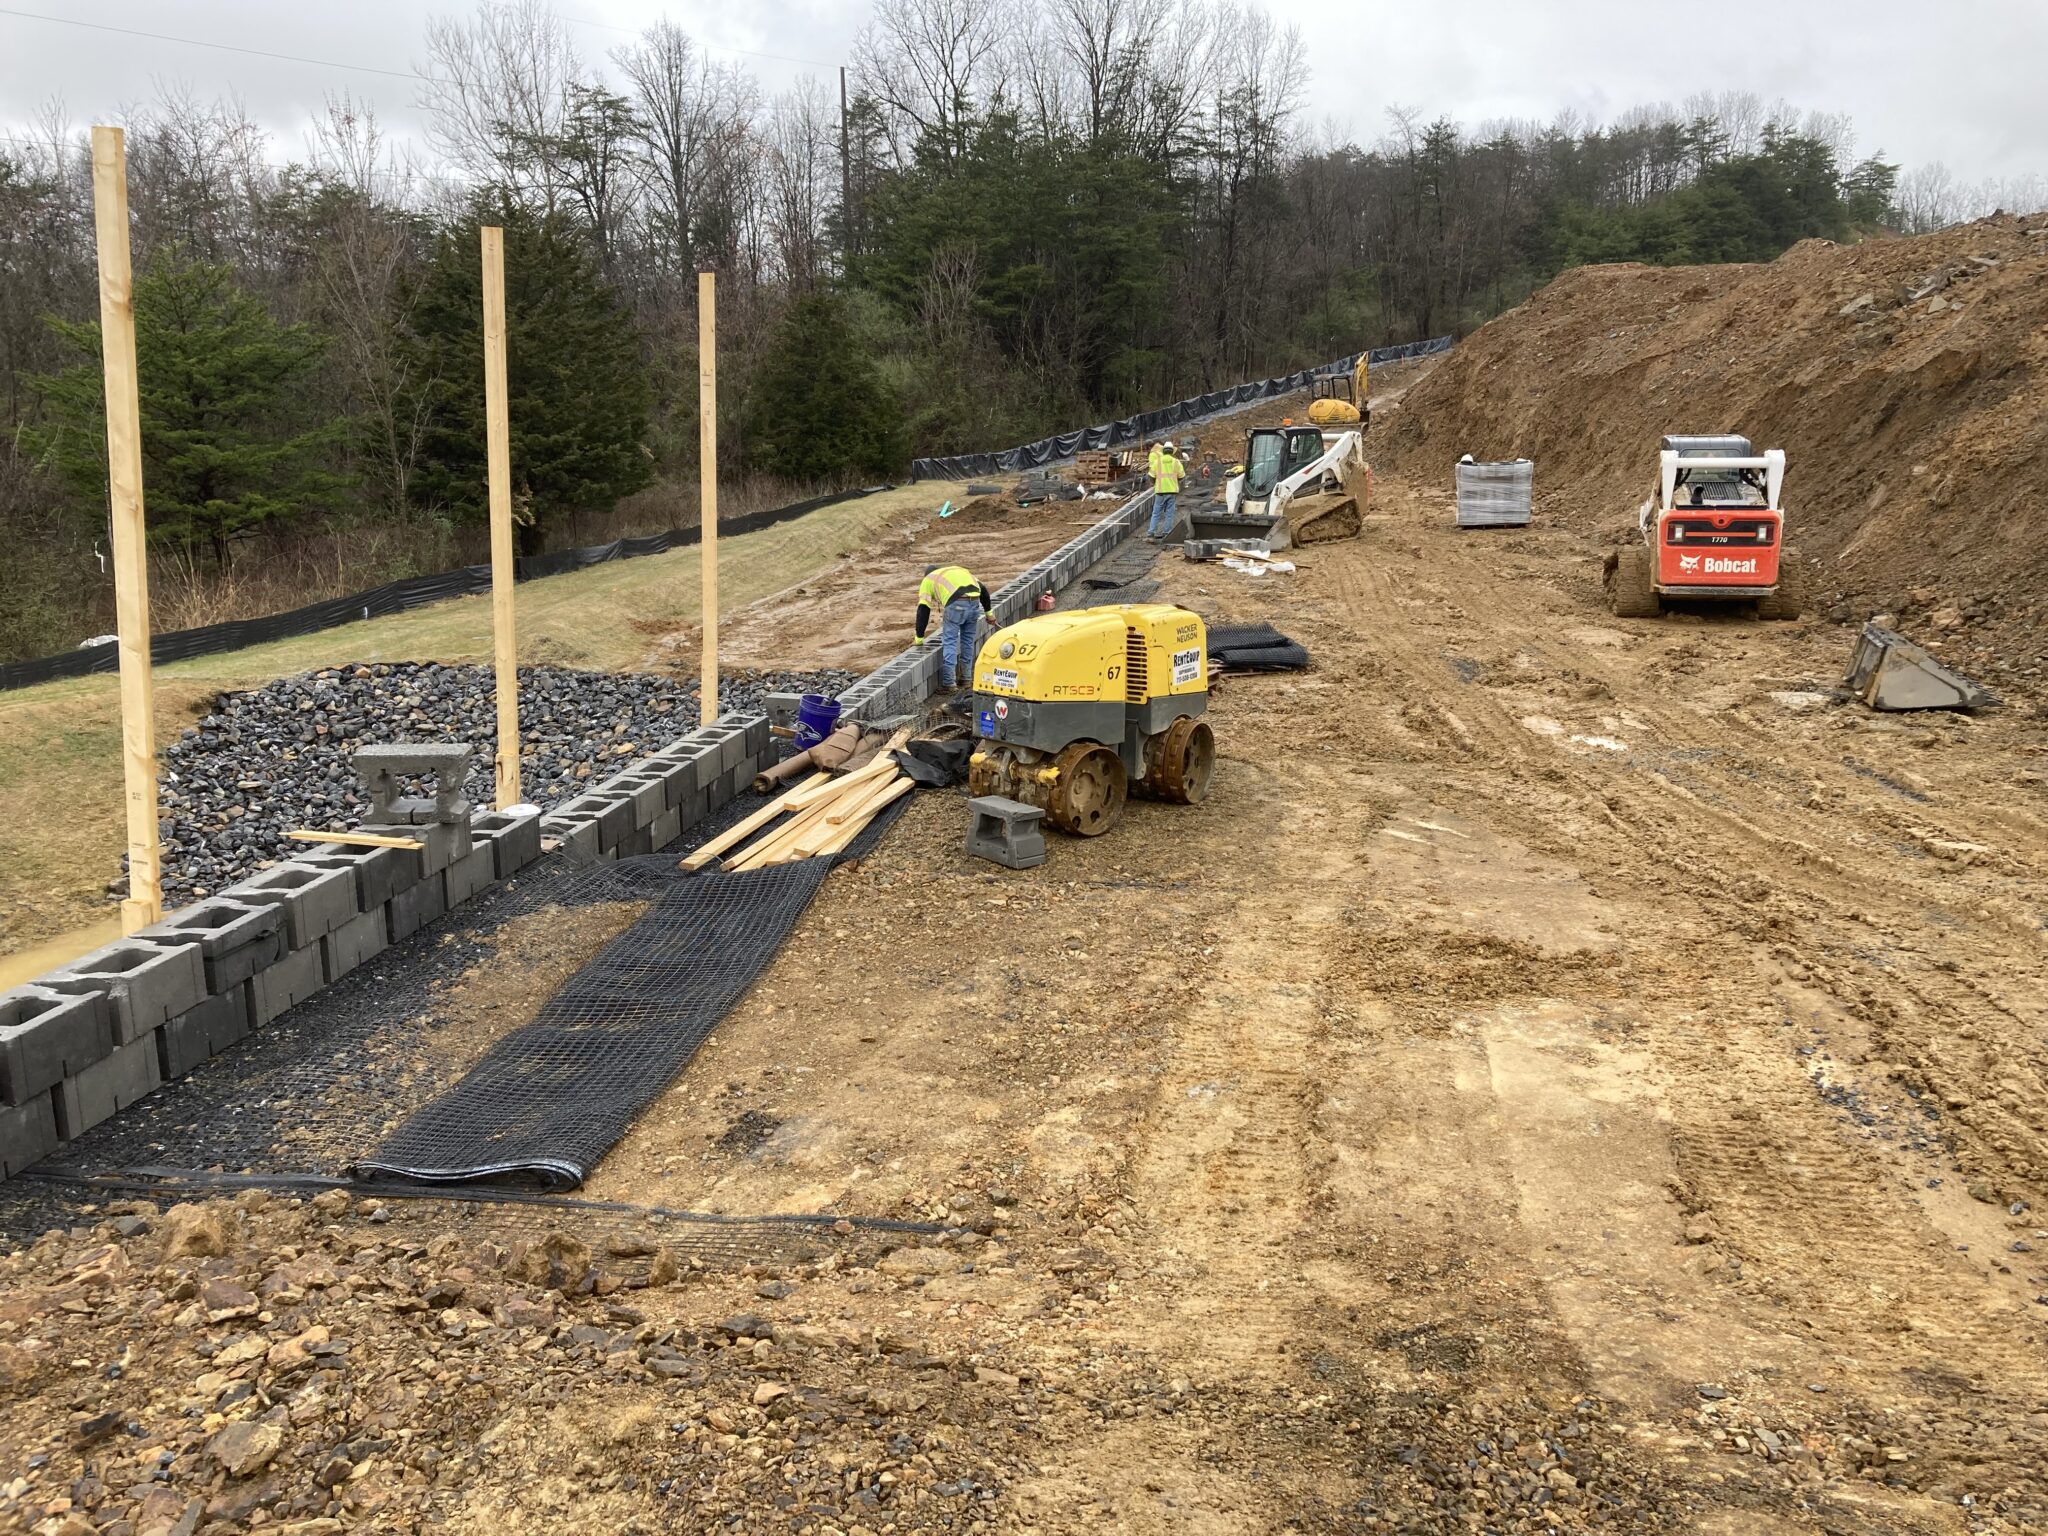 CornerStone 100 geogrid retaining wall and compaction.